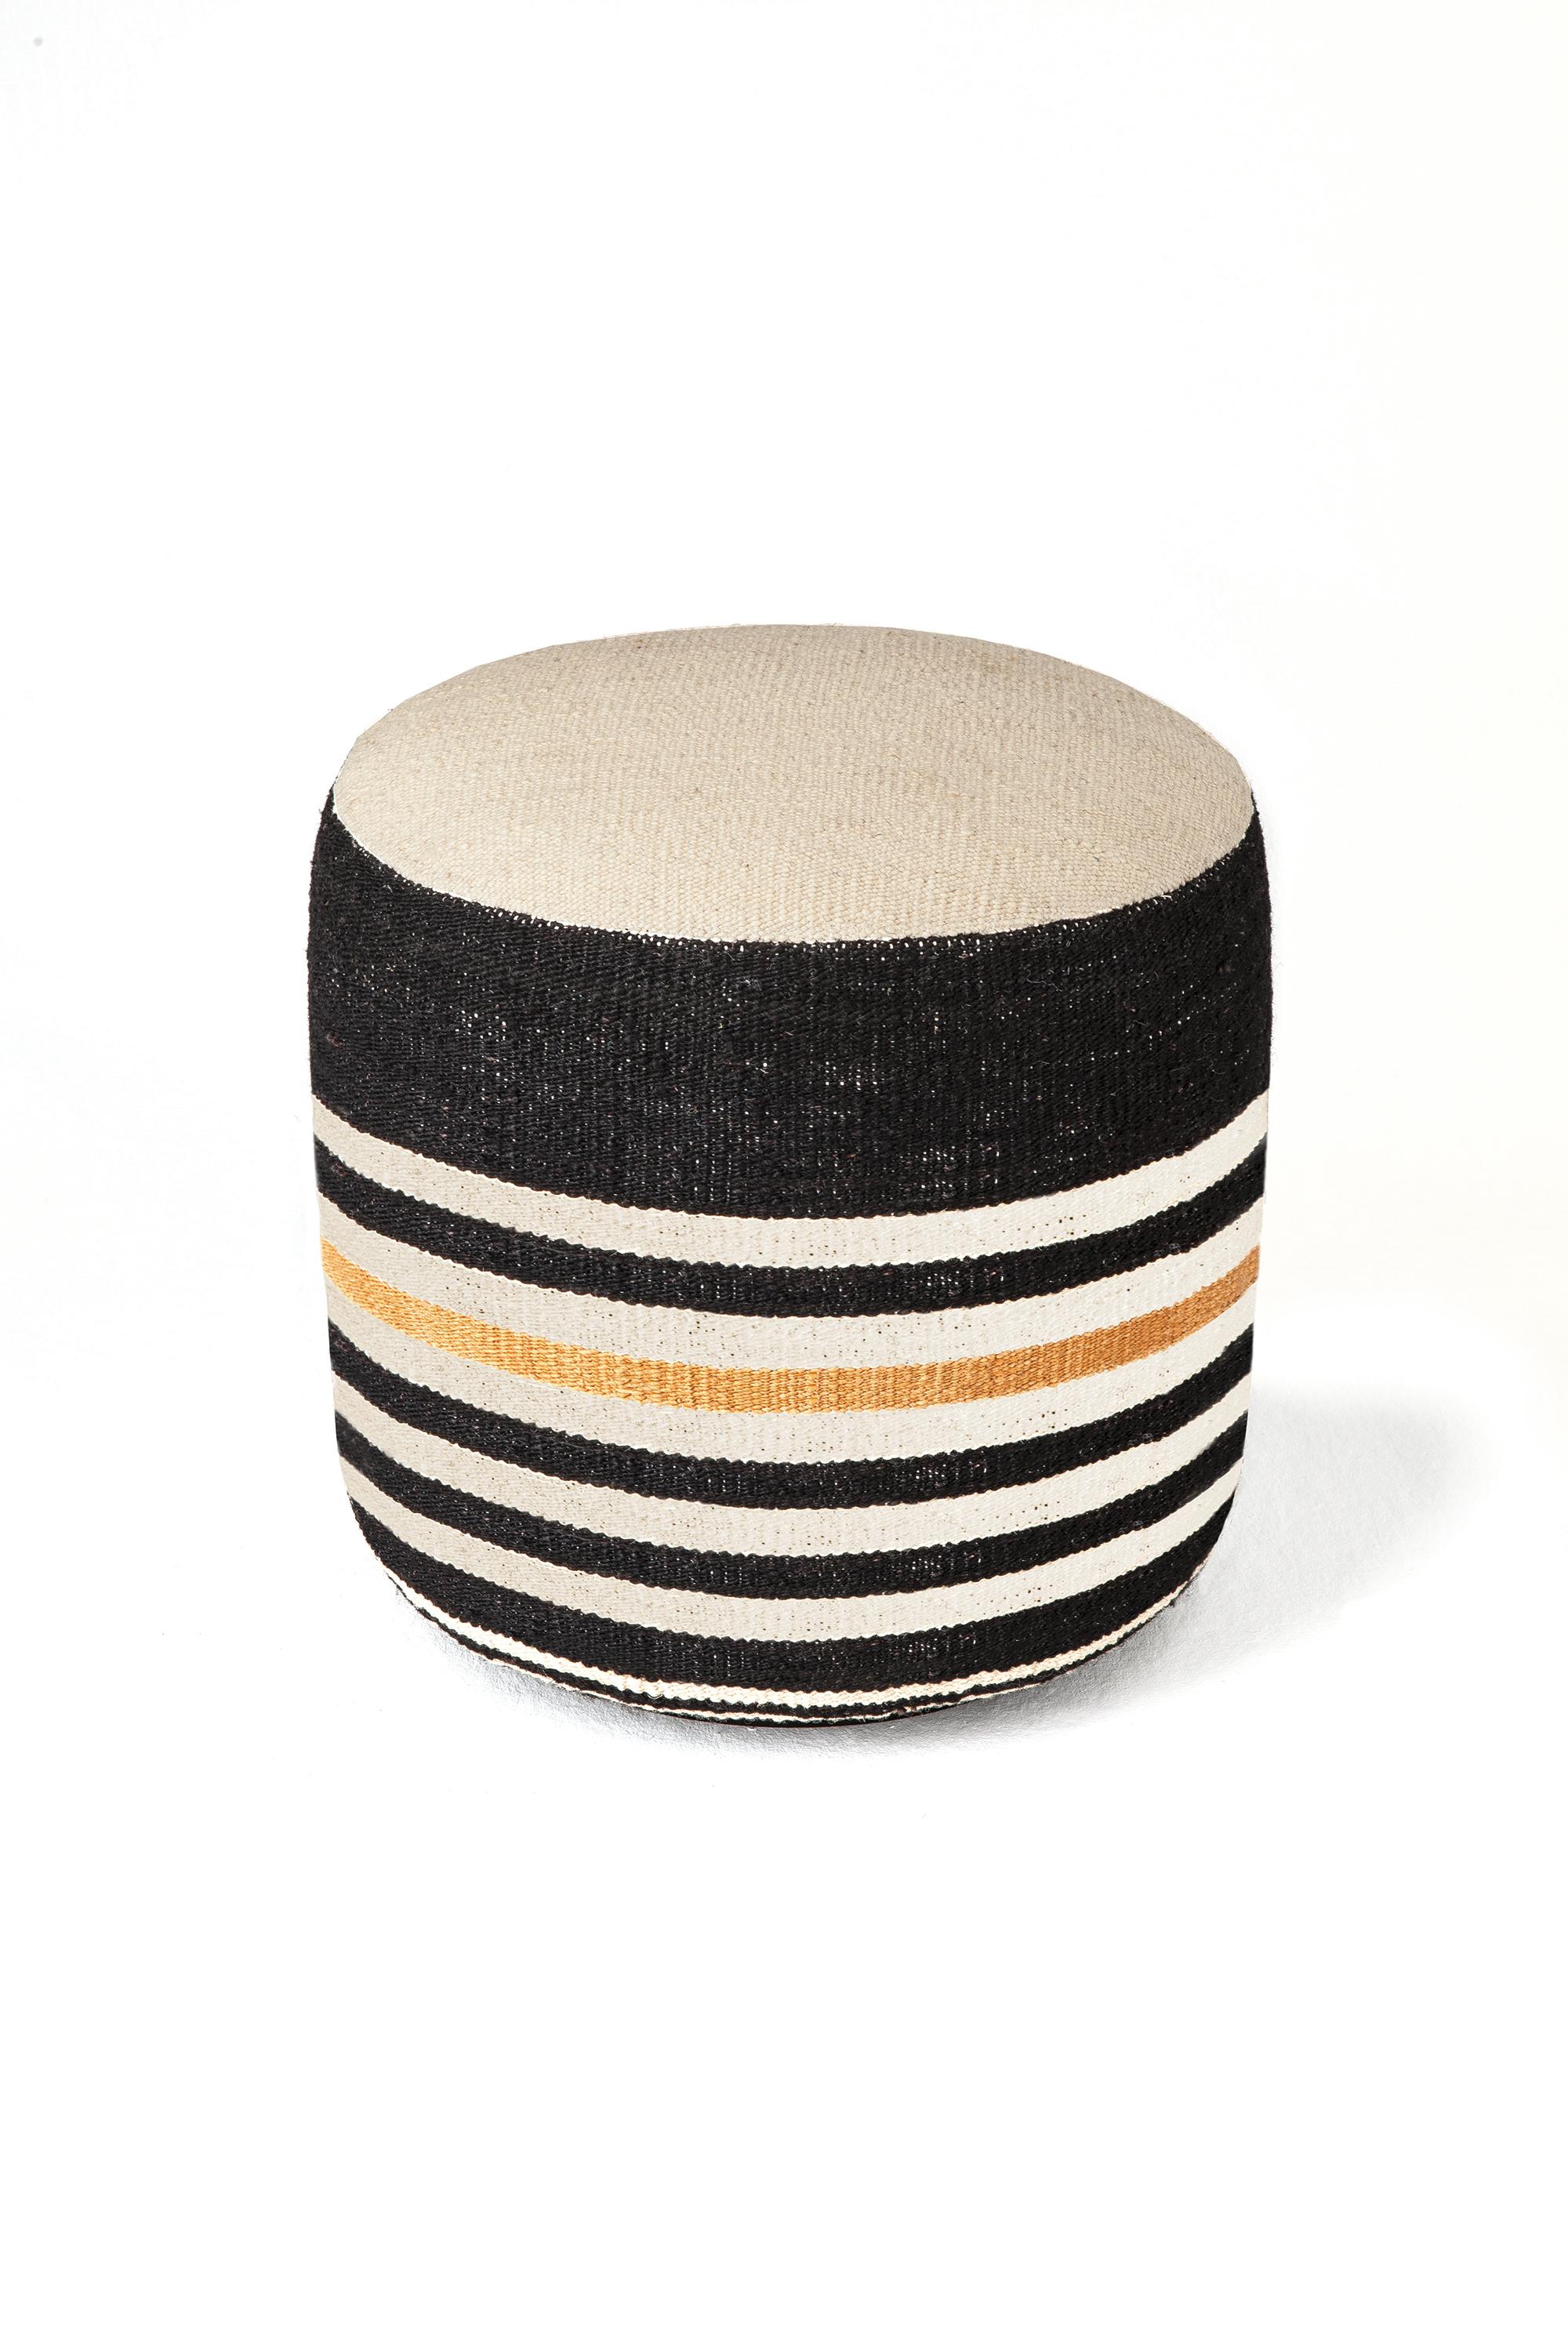 'Kilim 2' Pouf by Nani Marquina and Marcos Catalán for Nanimarquina For Sale 6